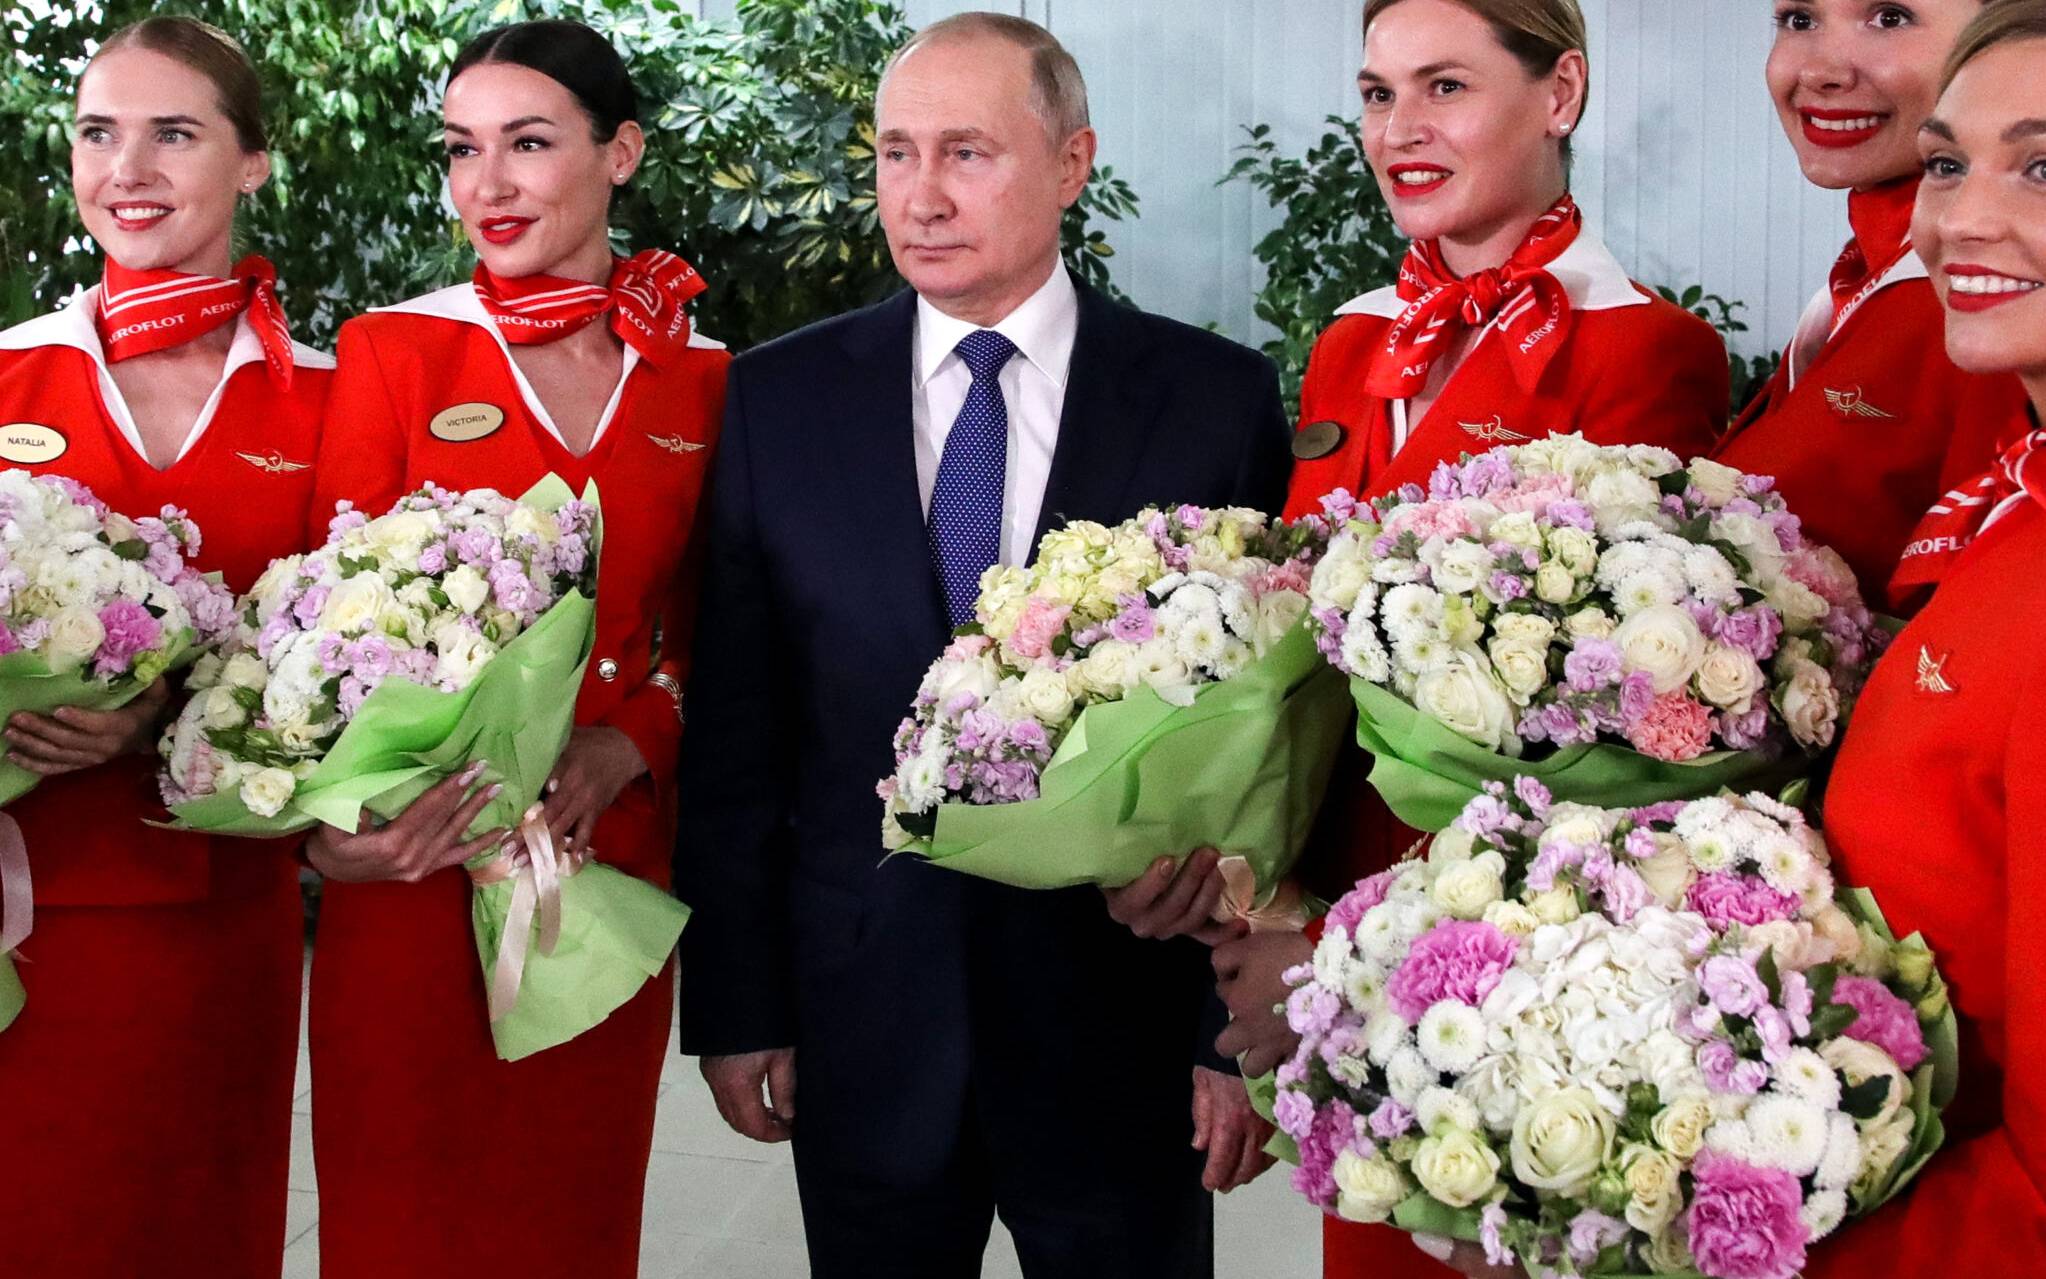 Russian President Vladimir Putin (C) poses for photo with Aeroflot employees during his visit to Aeroflot aviation training complex outside Moscow on March 5, 2022. - Russian President Vladimir Putin said Saturday that any country that sought to impose a no-fly zone over Ukraine would be considered by Moscow to have entered the conflict. (Photo by Mikhail KLIMENTYEV / SPUTNIK / AFP)